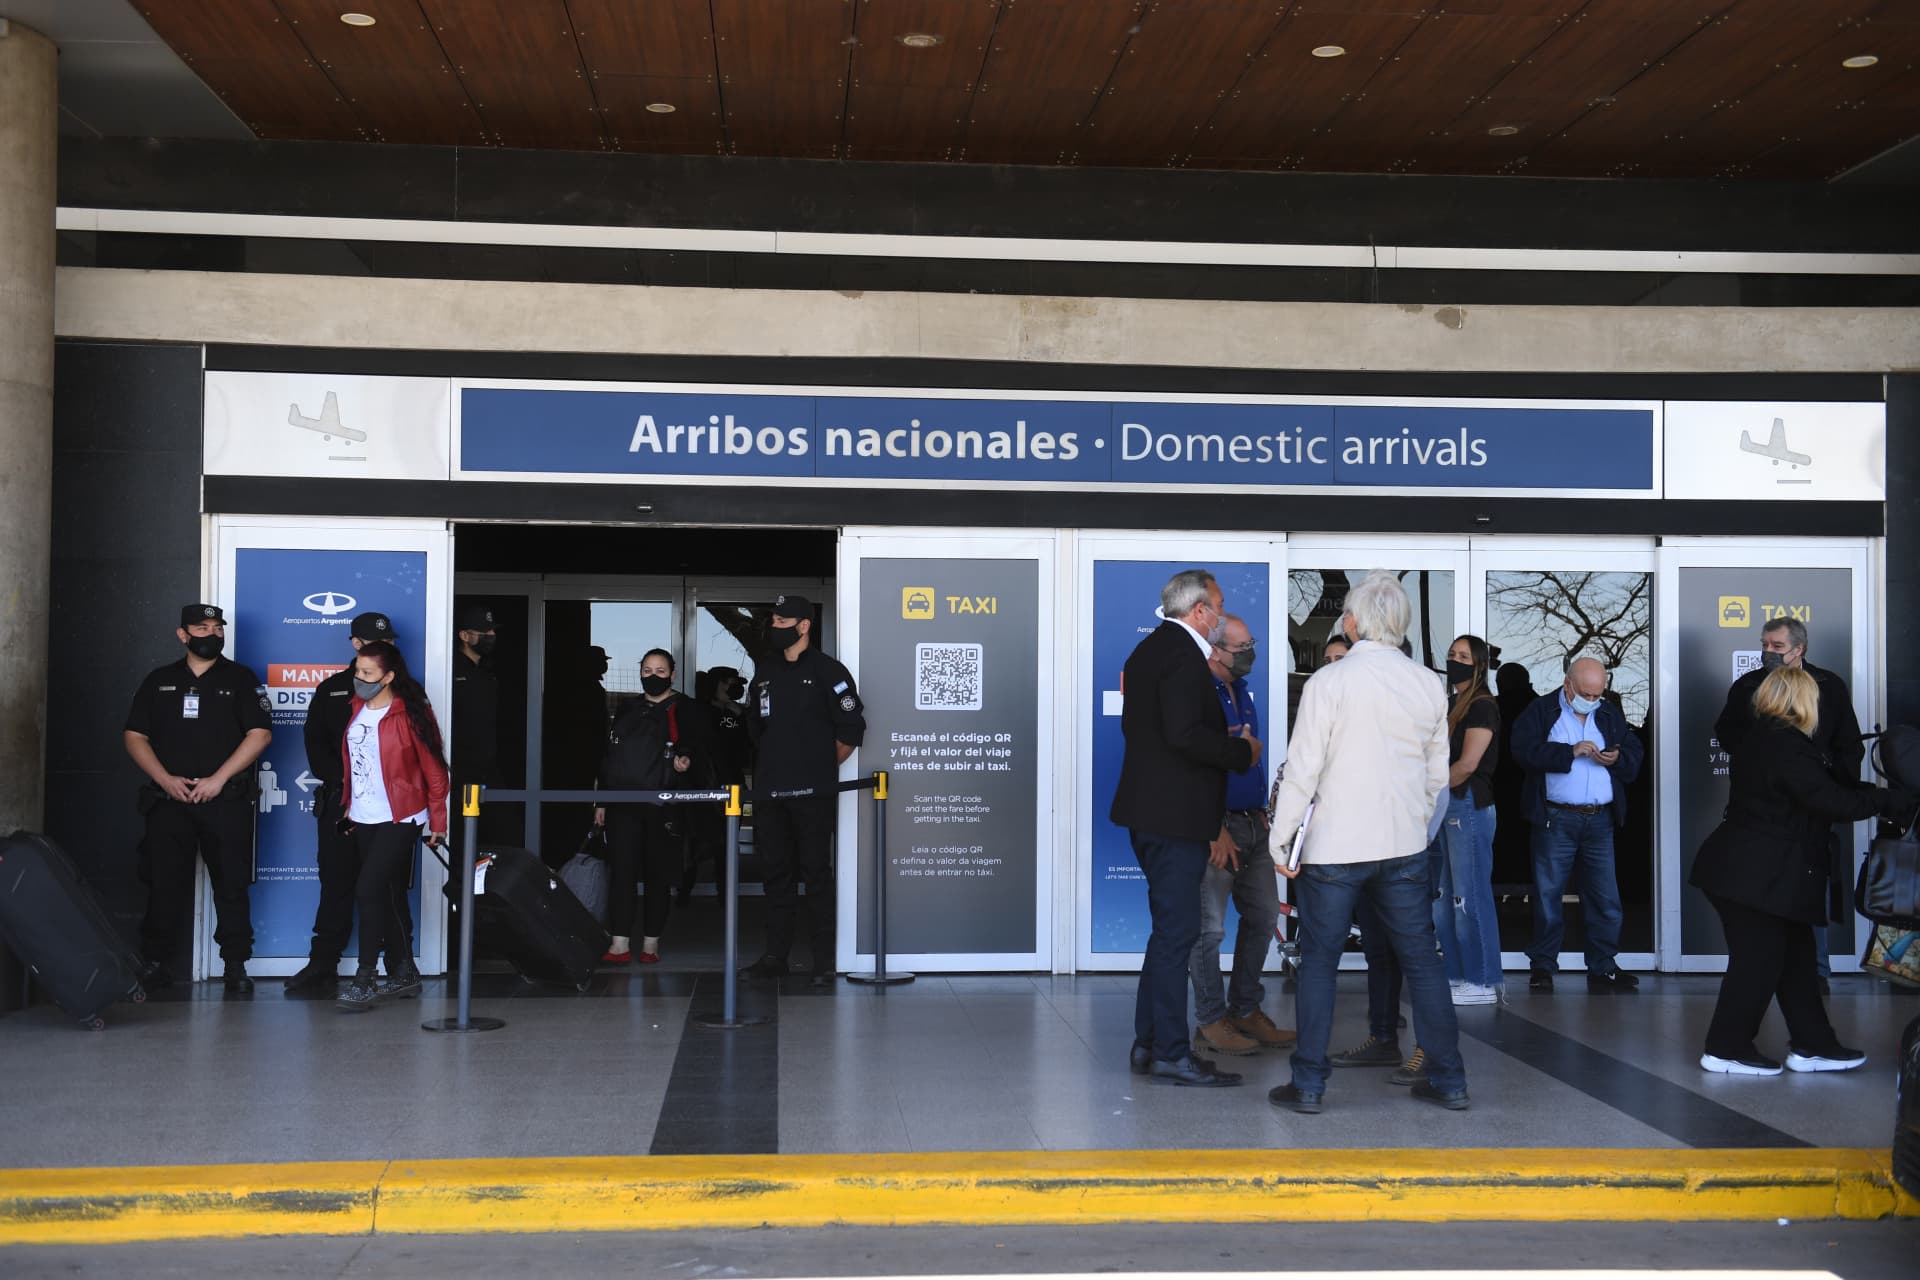 How to get from Buenos Aires airport to the city center